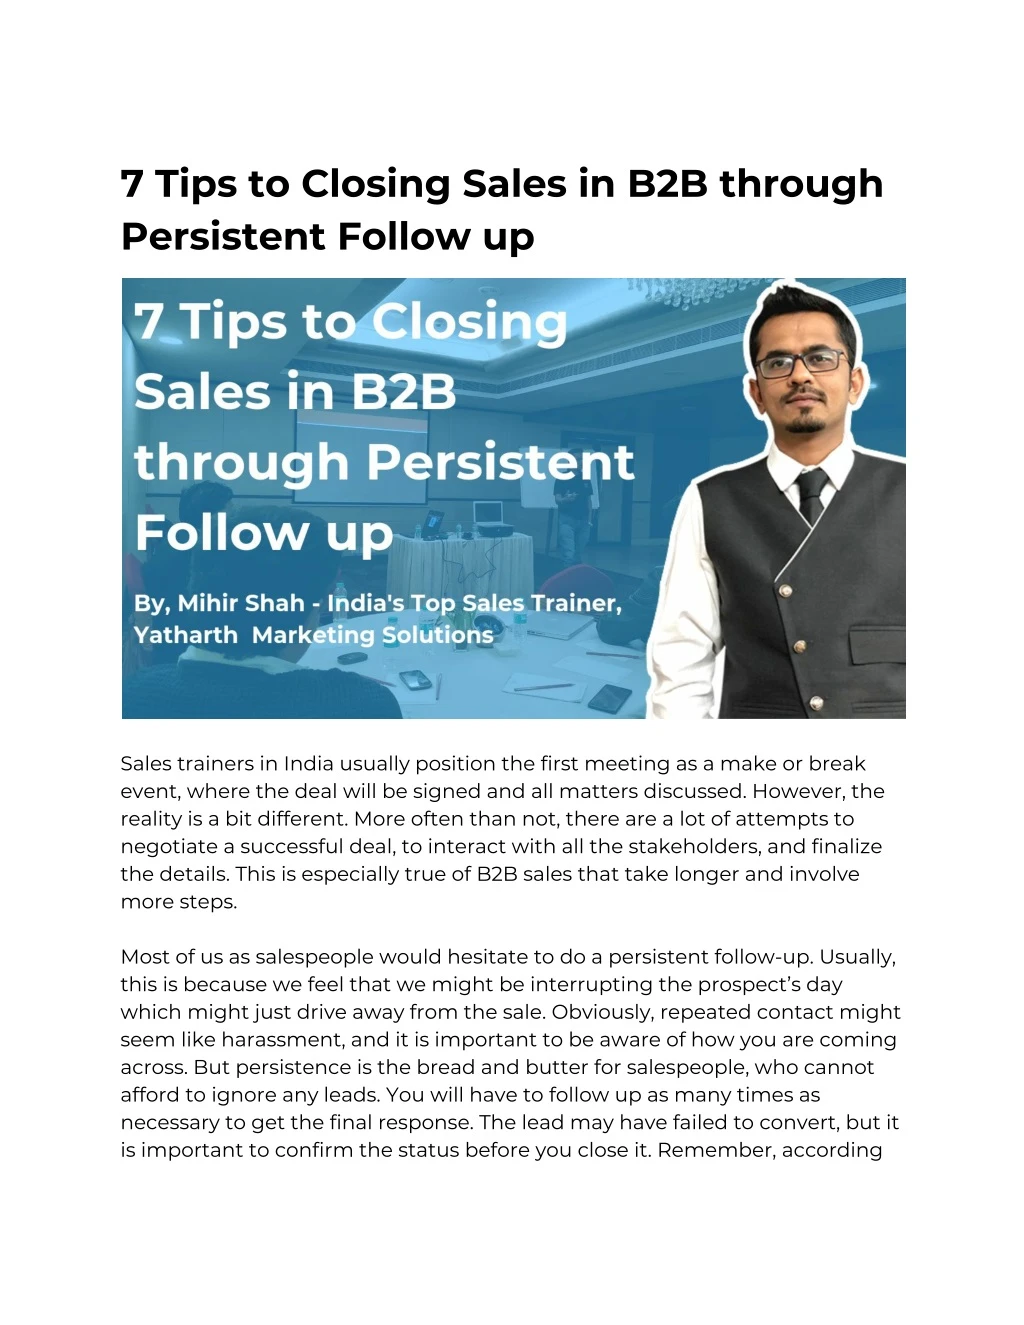 7 tips to closing sales in b2b through persistent